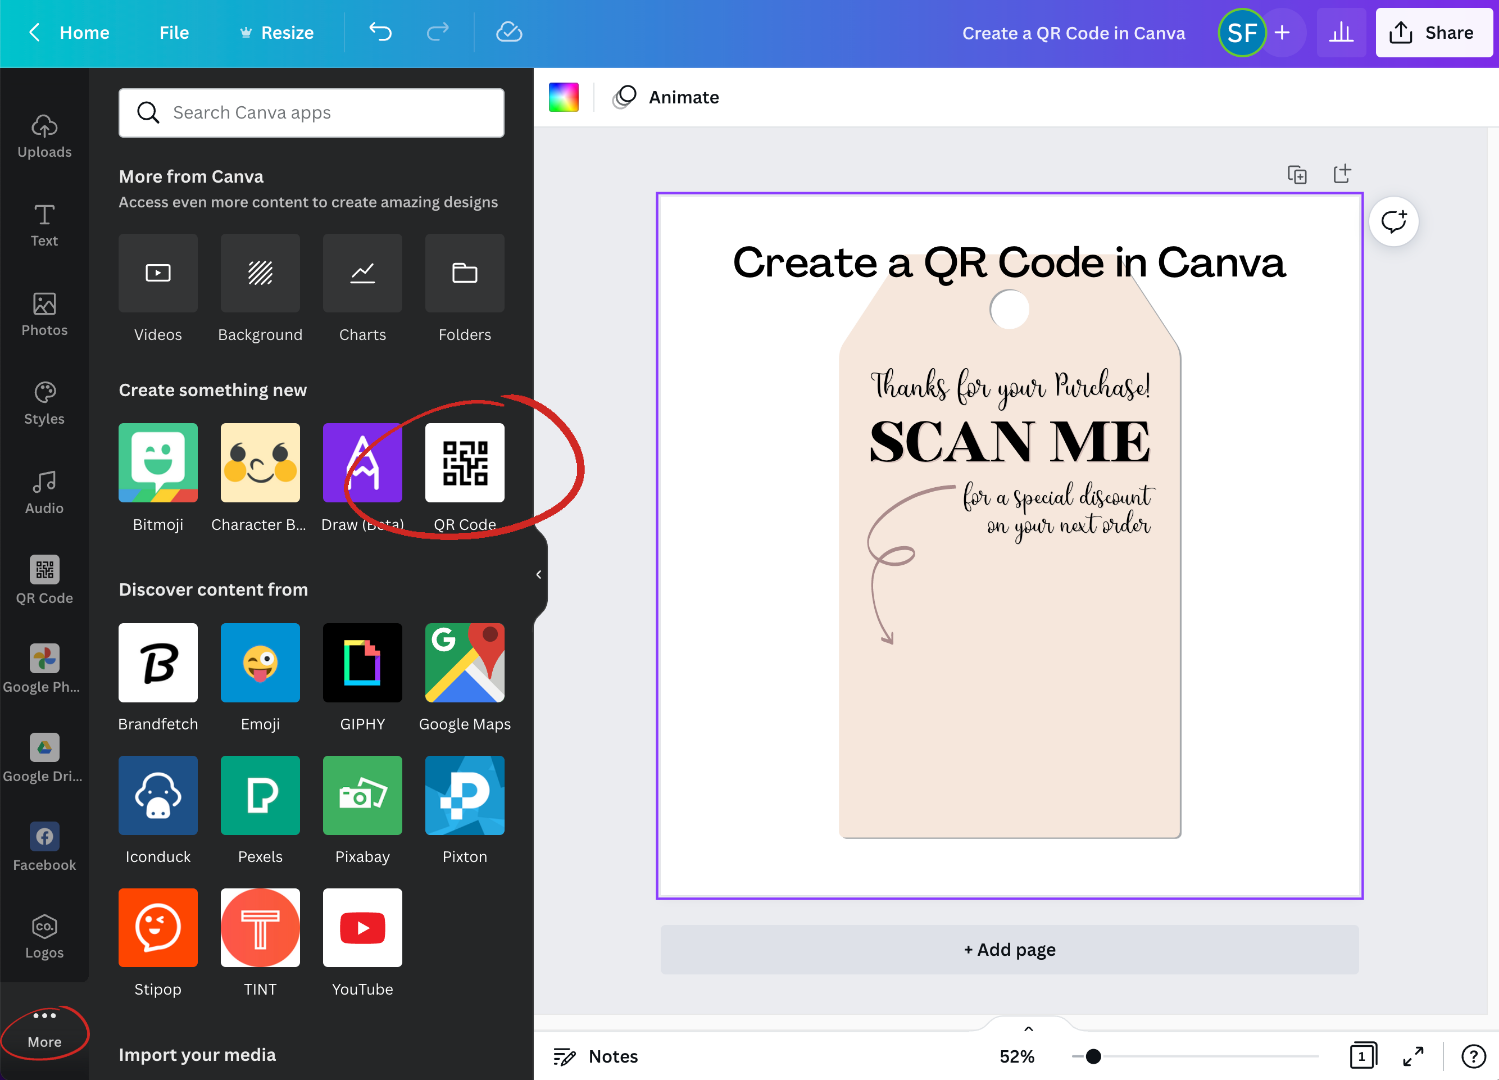 How to Create a QR Code in Canva So Fontsy VIP